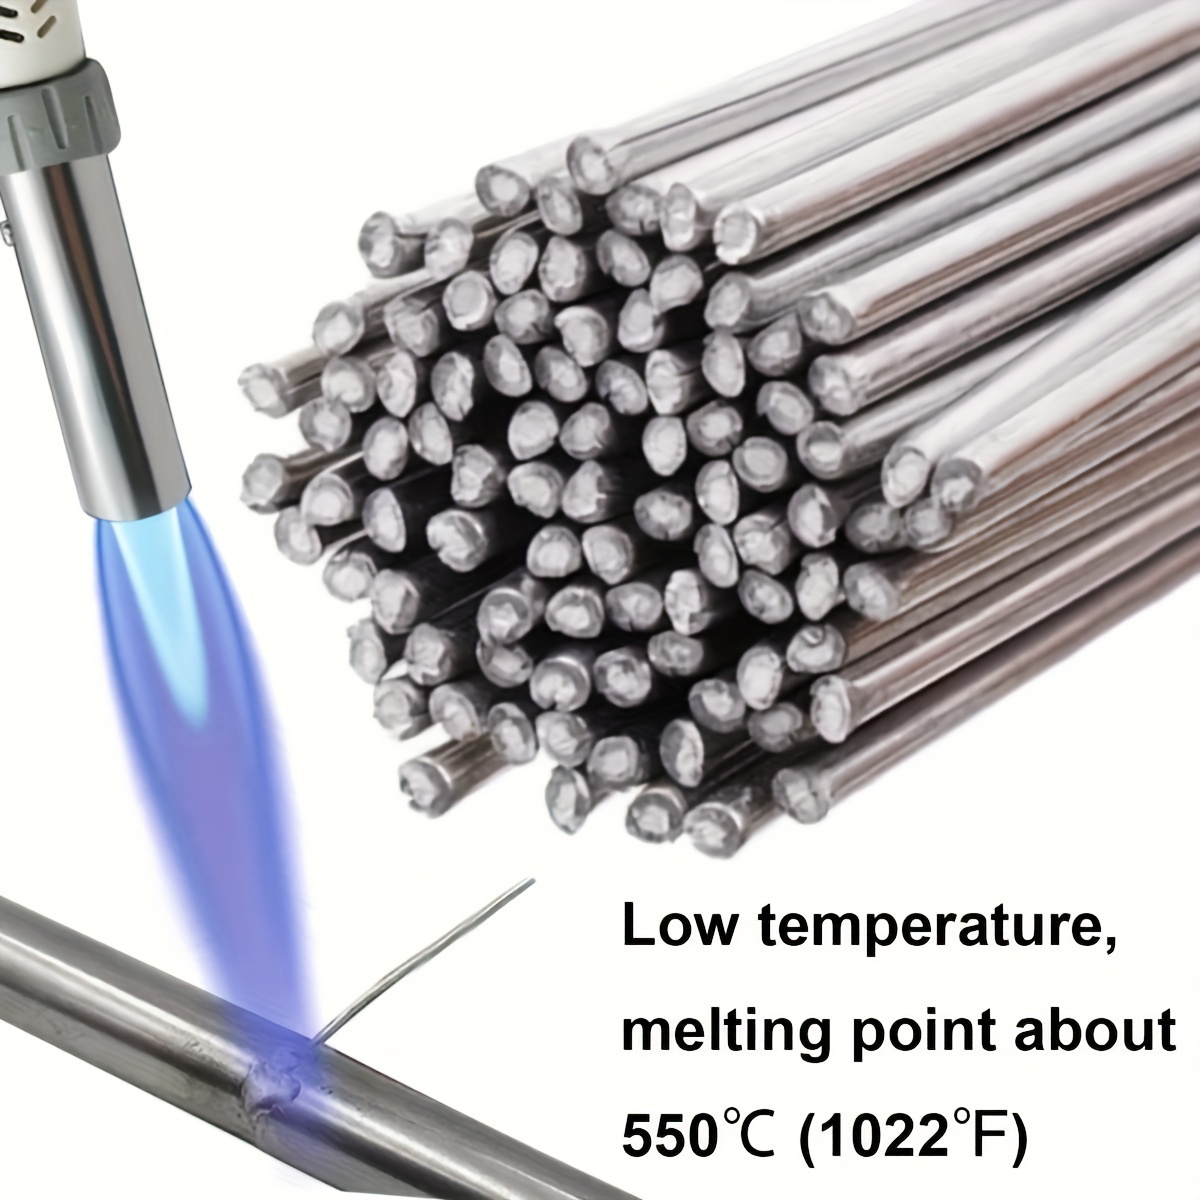 

25/50-piece Easy-melt Low Temp Aluminum Welding Rods - Strong & Safe For Diy And Professional Use